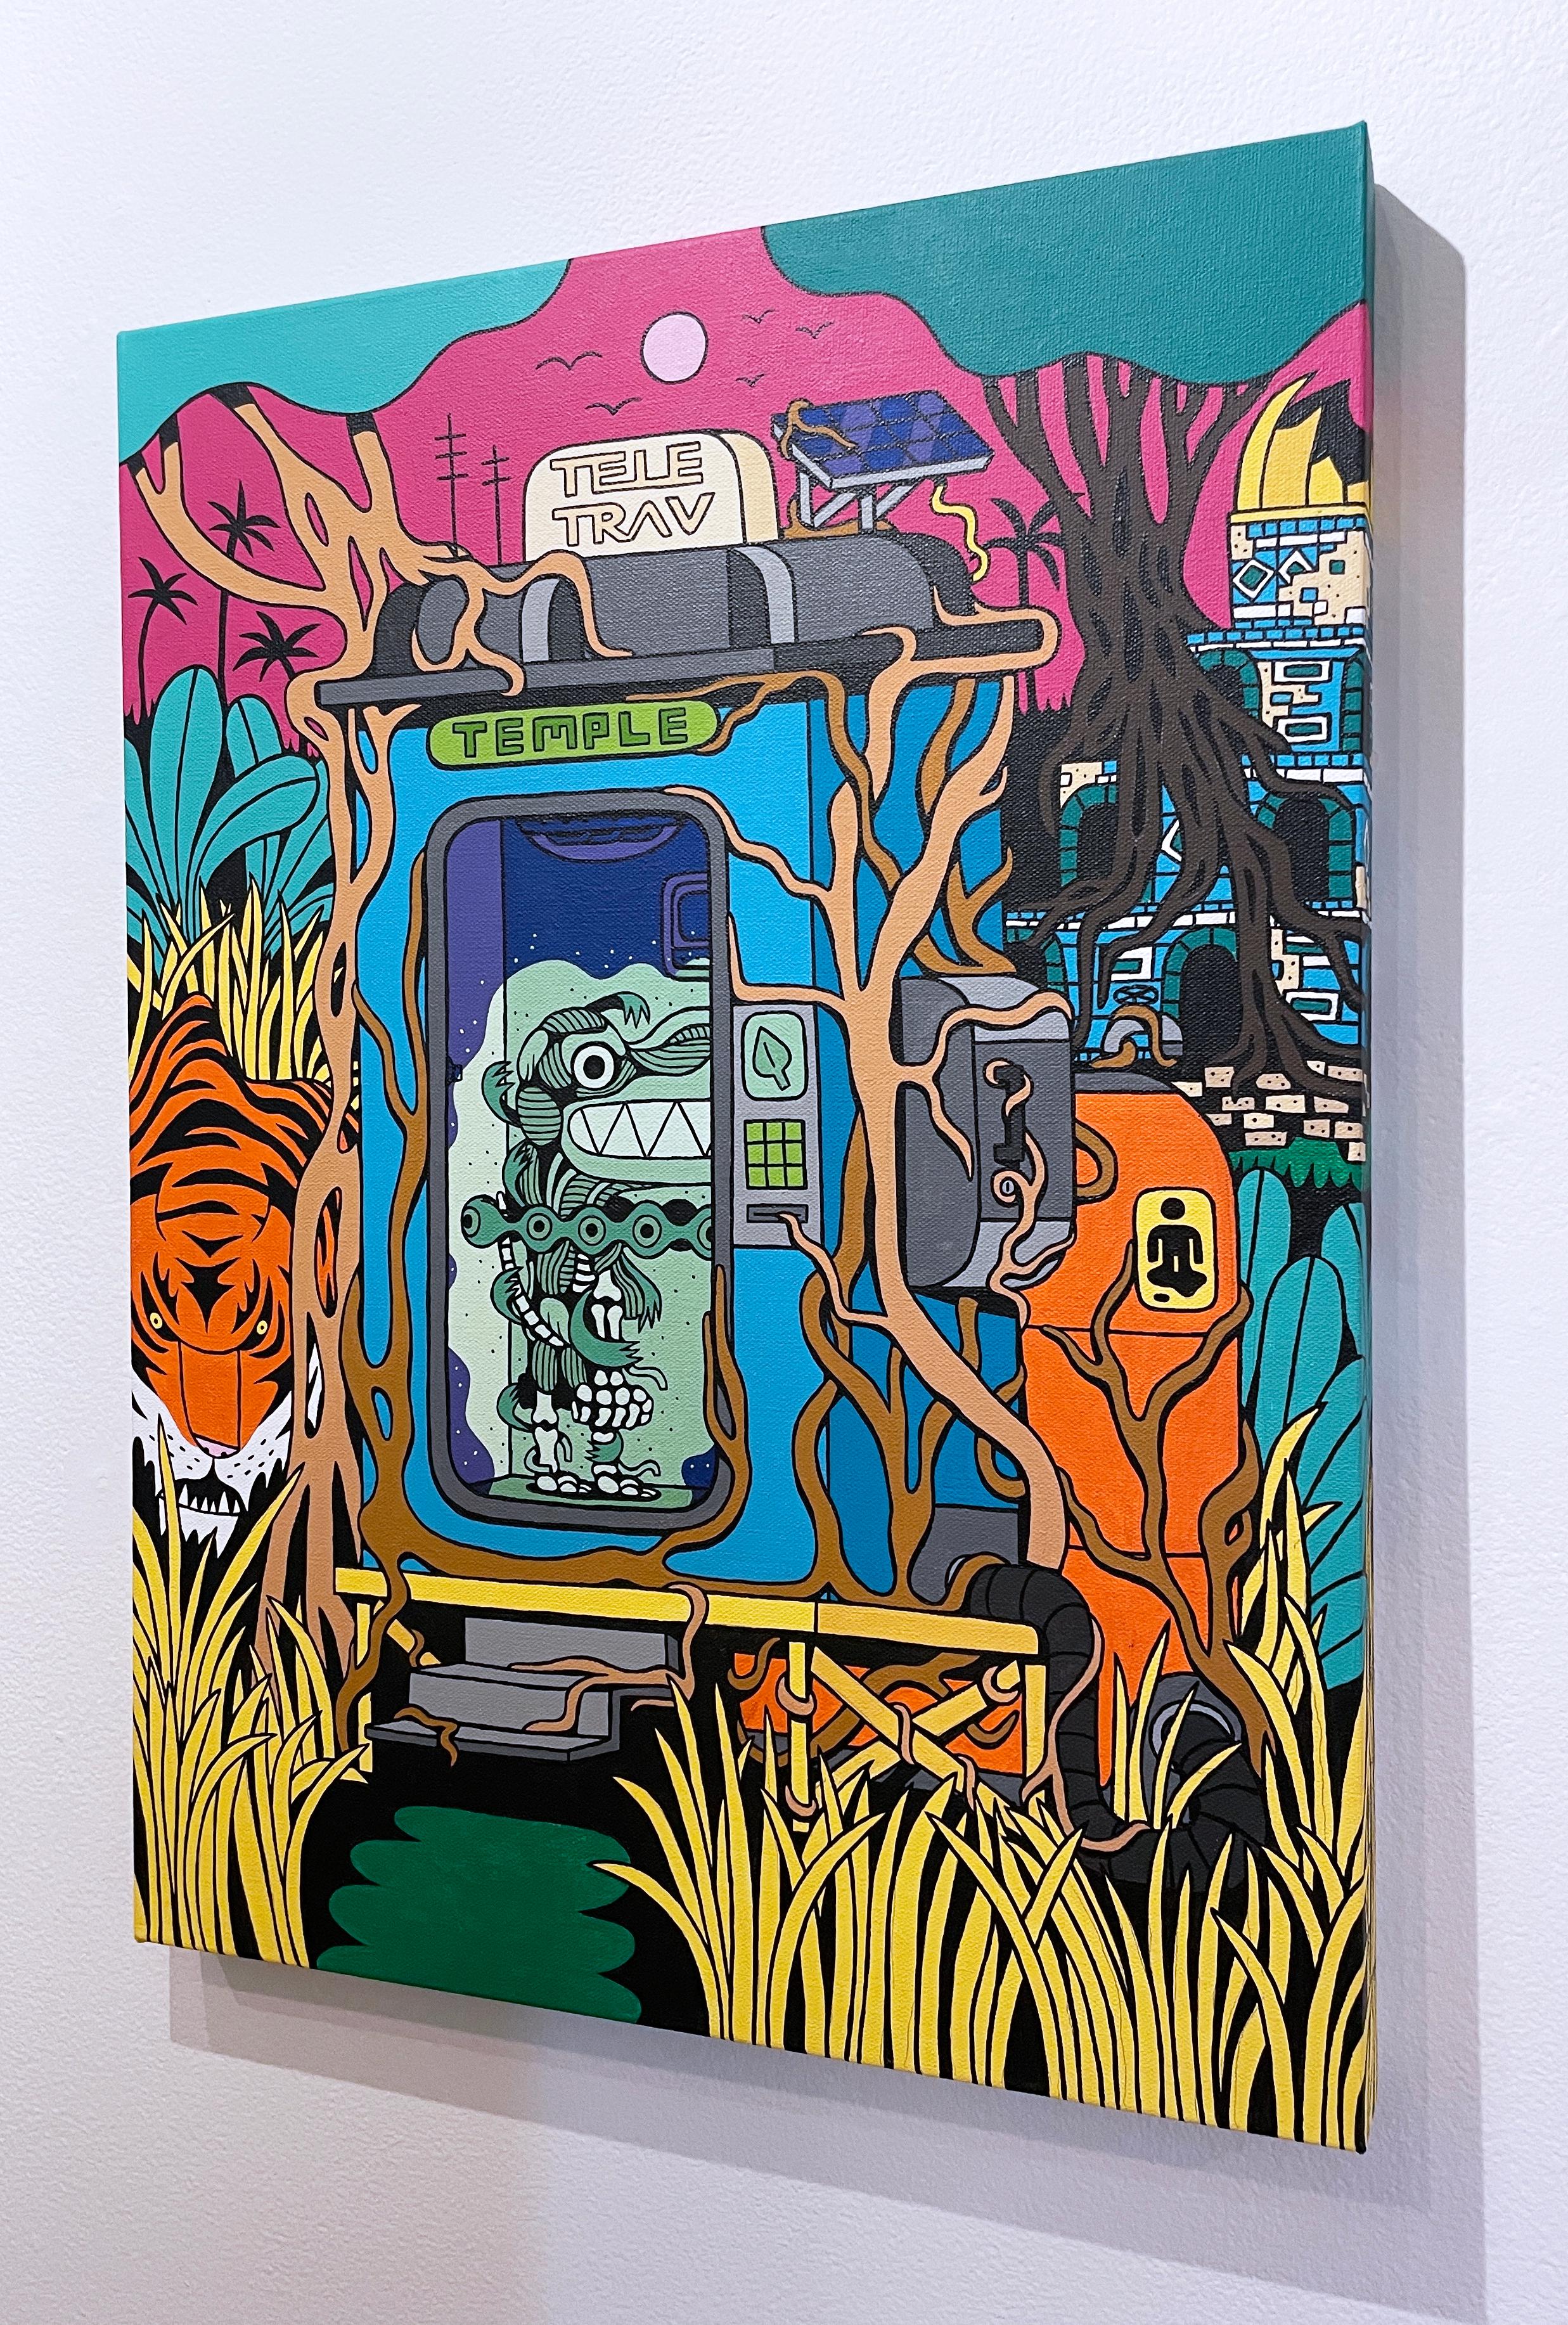 Tele-Trav (Temple) by BARC the dog (2022), pop art comic book style, acrylic on canvas, illustration, cartoon inspired character art, jungle, tiger, trees, teleportation machine

Welcome to the world BARC the dog. In this vignette, BARC is inside a